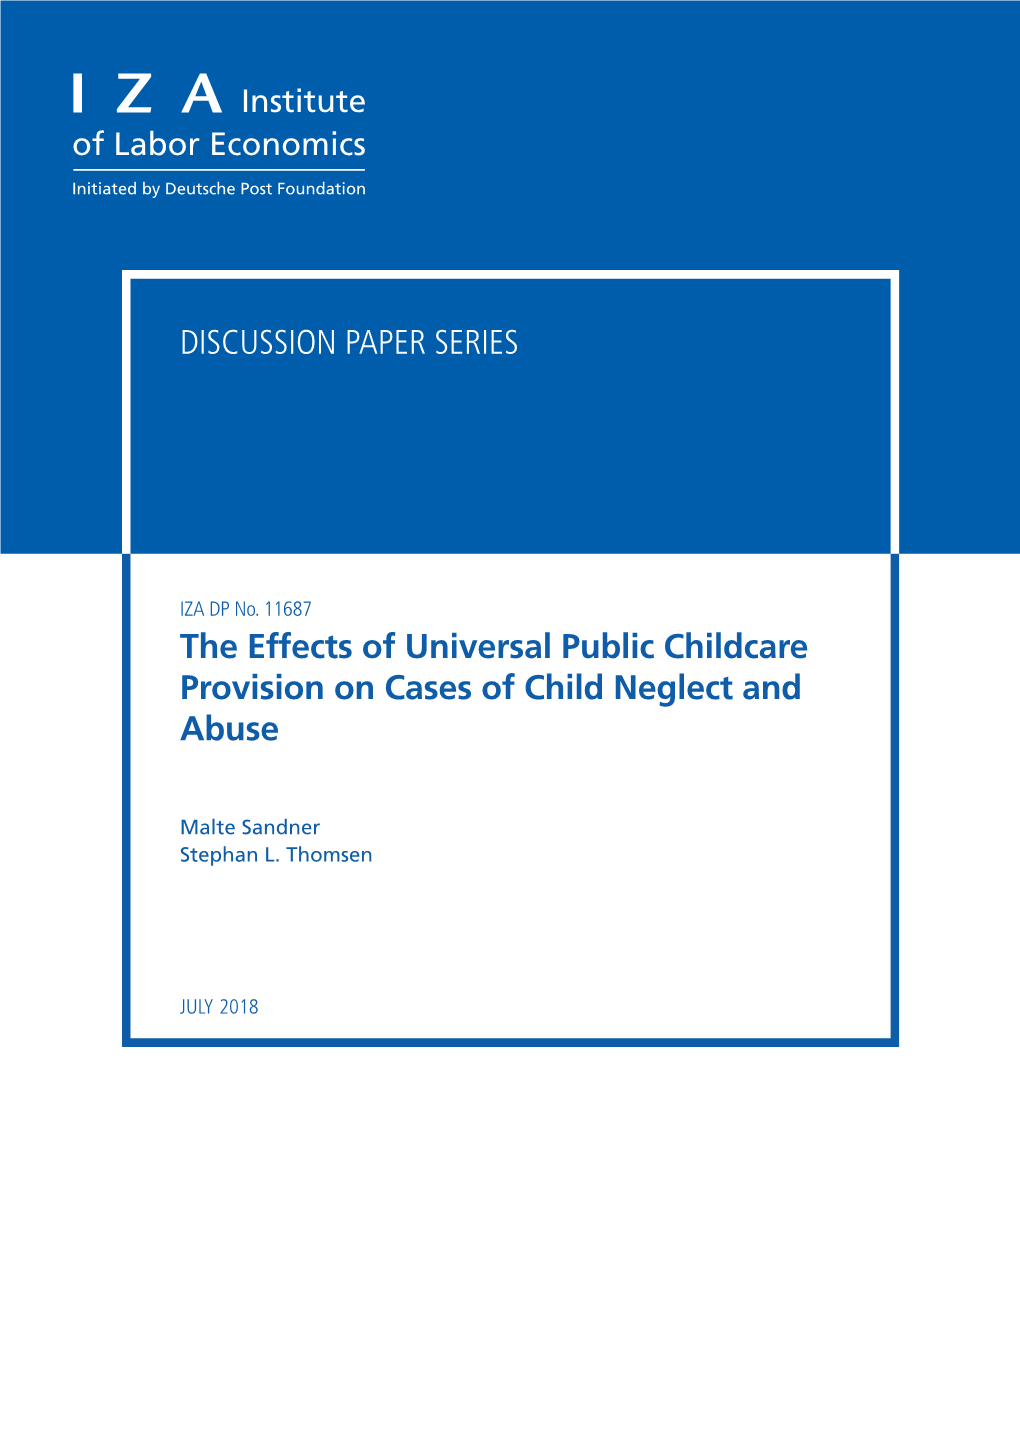 The Effects of Universal Public Childcare Provision on Cases of Child Neglect and Abuse